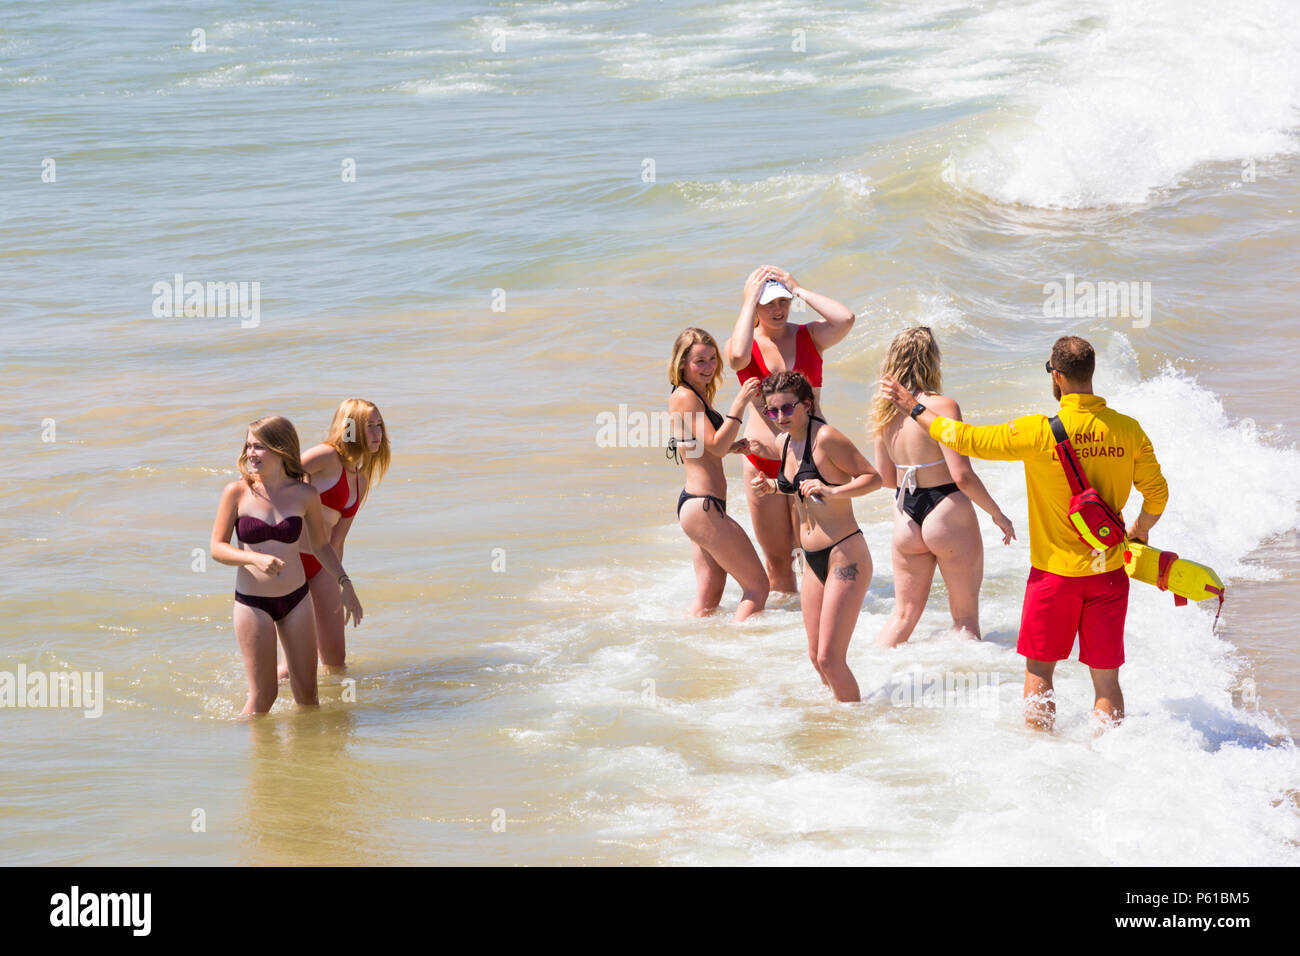 Bournemouth, Dorset, UK. 28th June 2018. UK weather: sunseekers head to the beaches at Bournemouth on another hot sunny day with unbroken blue skies and sunshine. A slight breeze makes the heat more bearable. A group of friends in skimpy bikinis have fun playing in the sea. Credit: Carolyn Jenkins/Alamy Live News Stock Photo